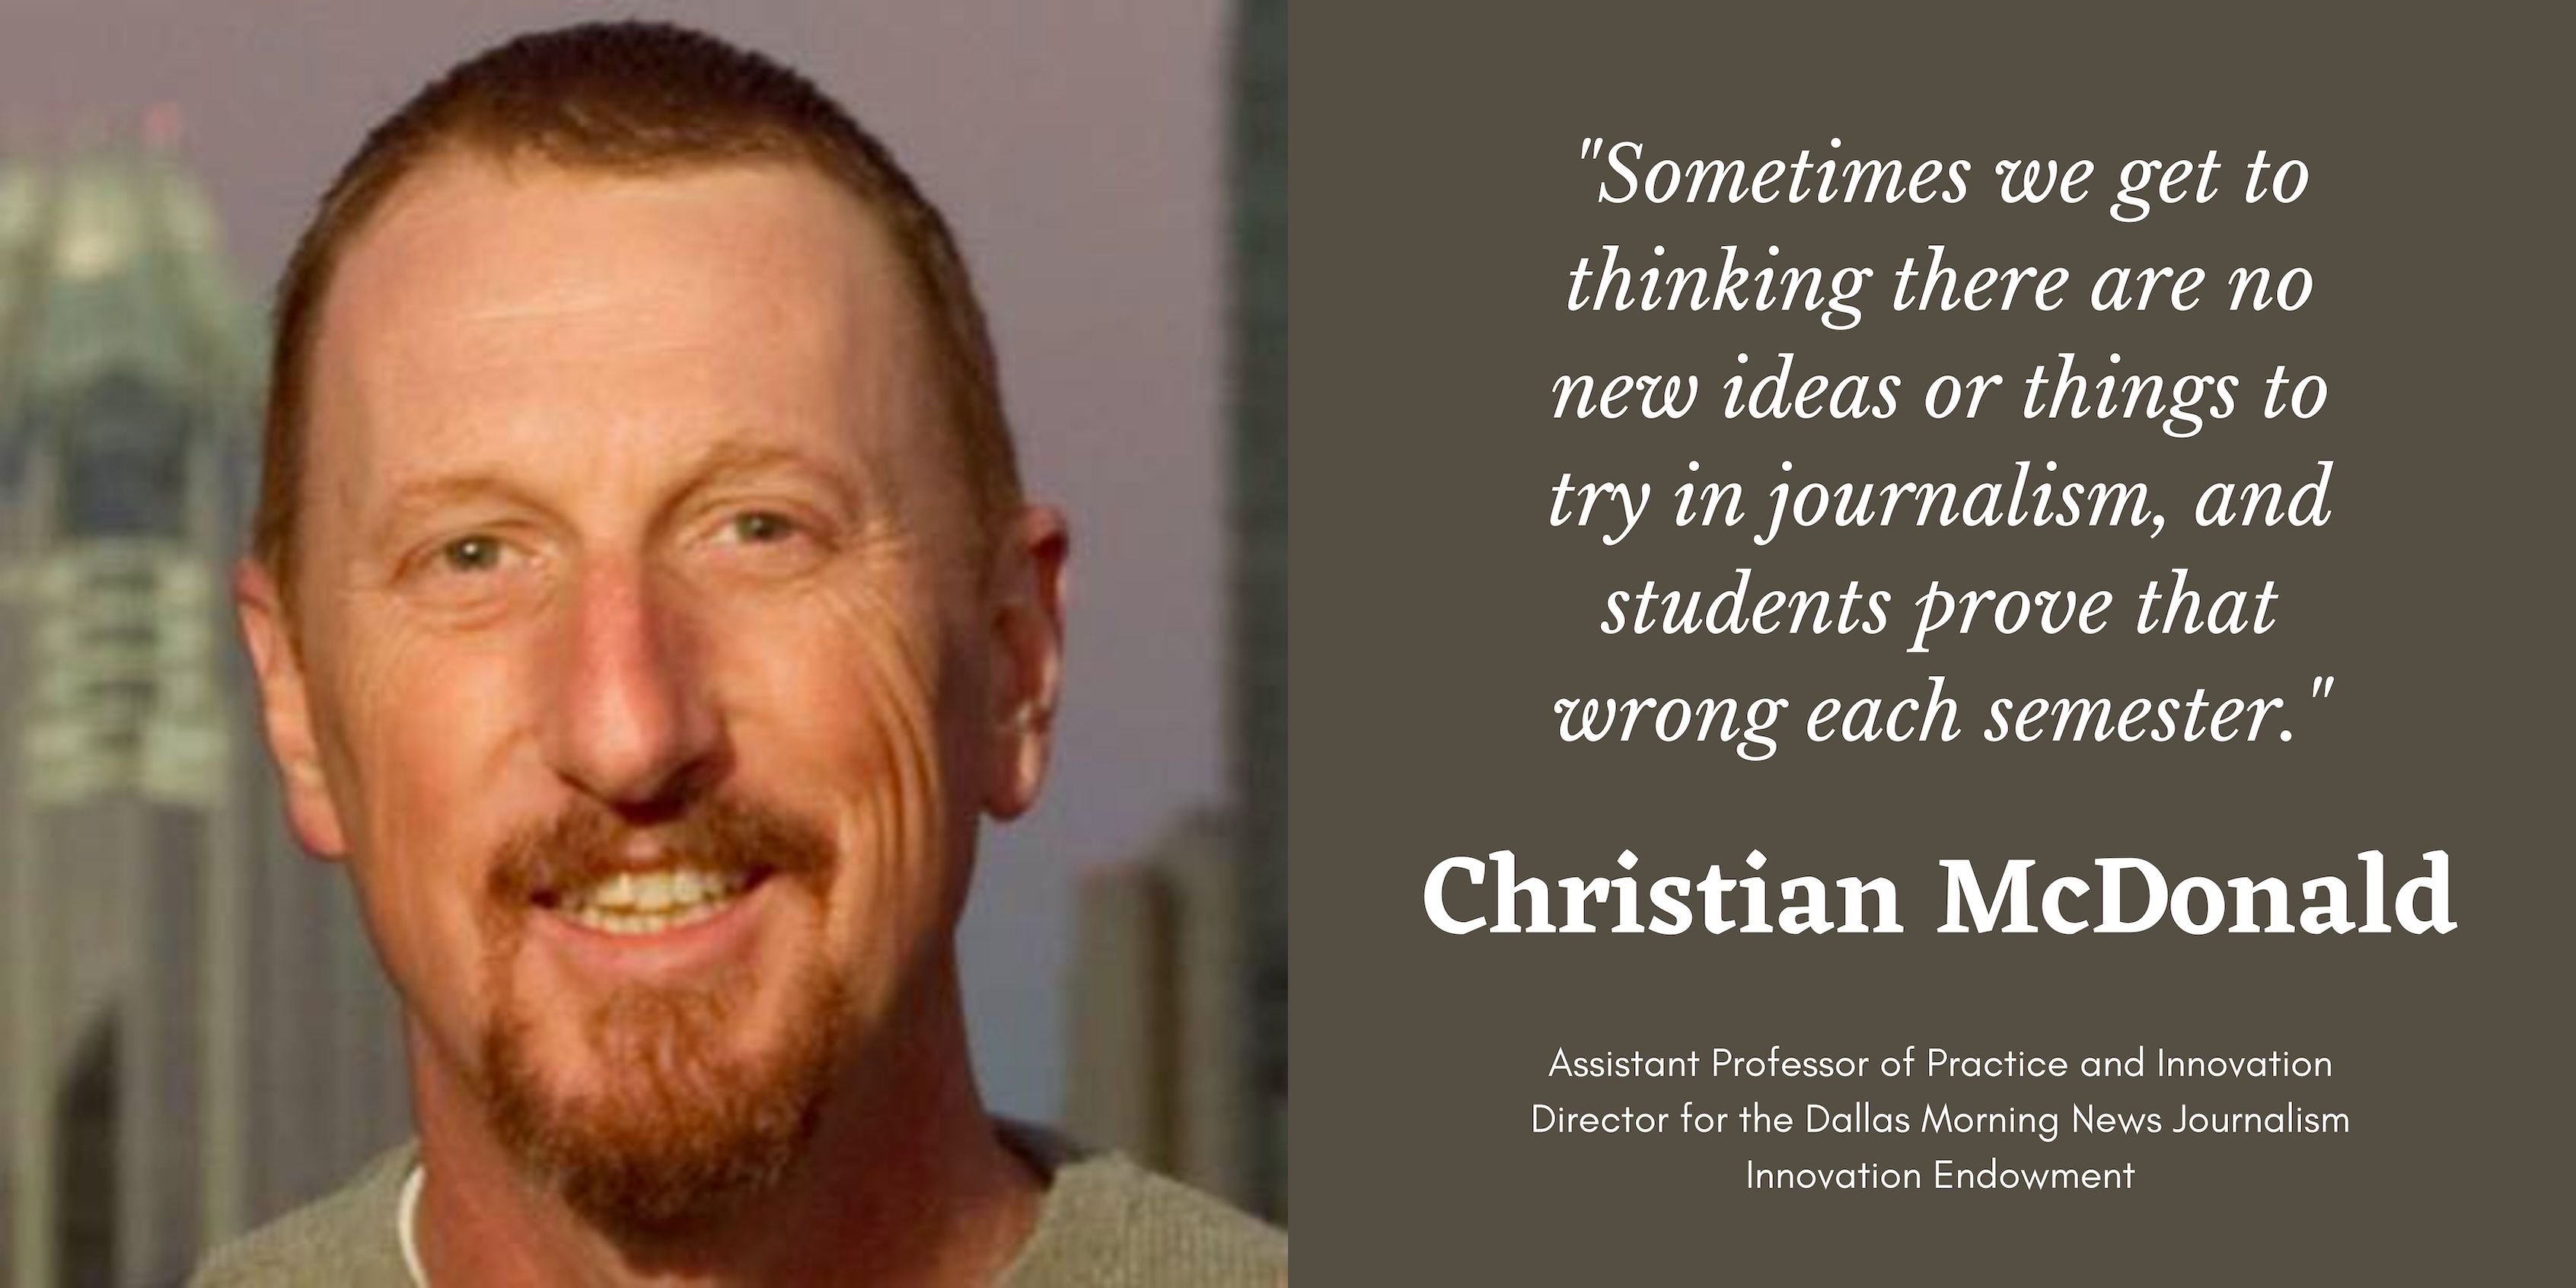 On the left is a photo of Professor Christian McDonald. On the right is a quote by McDonald that says, "Sometimes we get to thinking there are no new ideas or things to try in journalism, and students prove that wrong each semester." Below that is his name and position title.